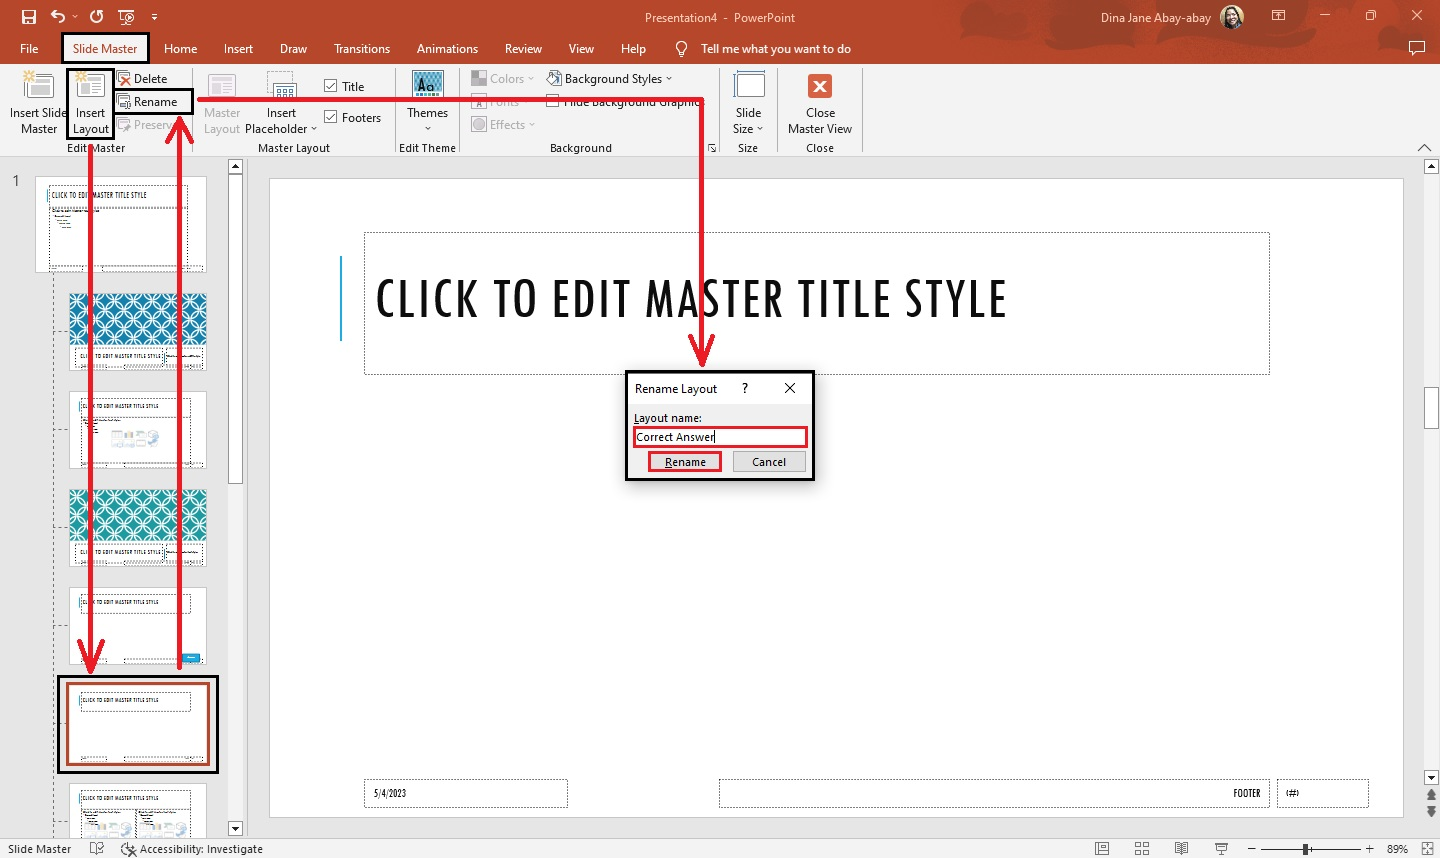 Go back to "Slide Master" tab and create the "Correct answer" slide layout and rename it